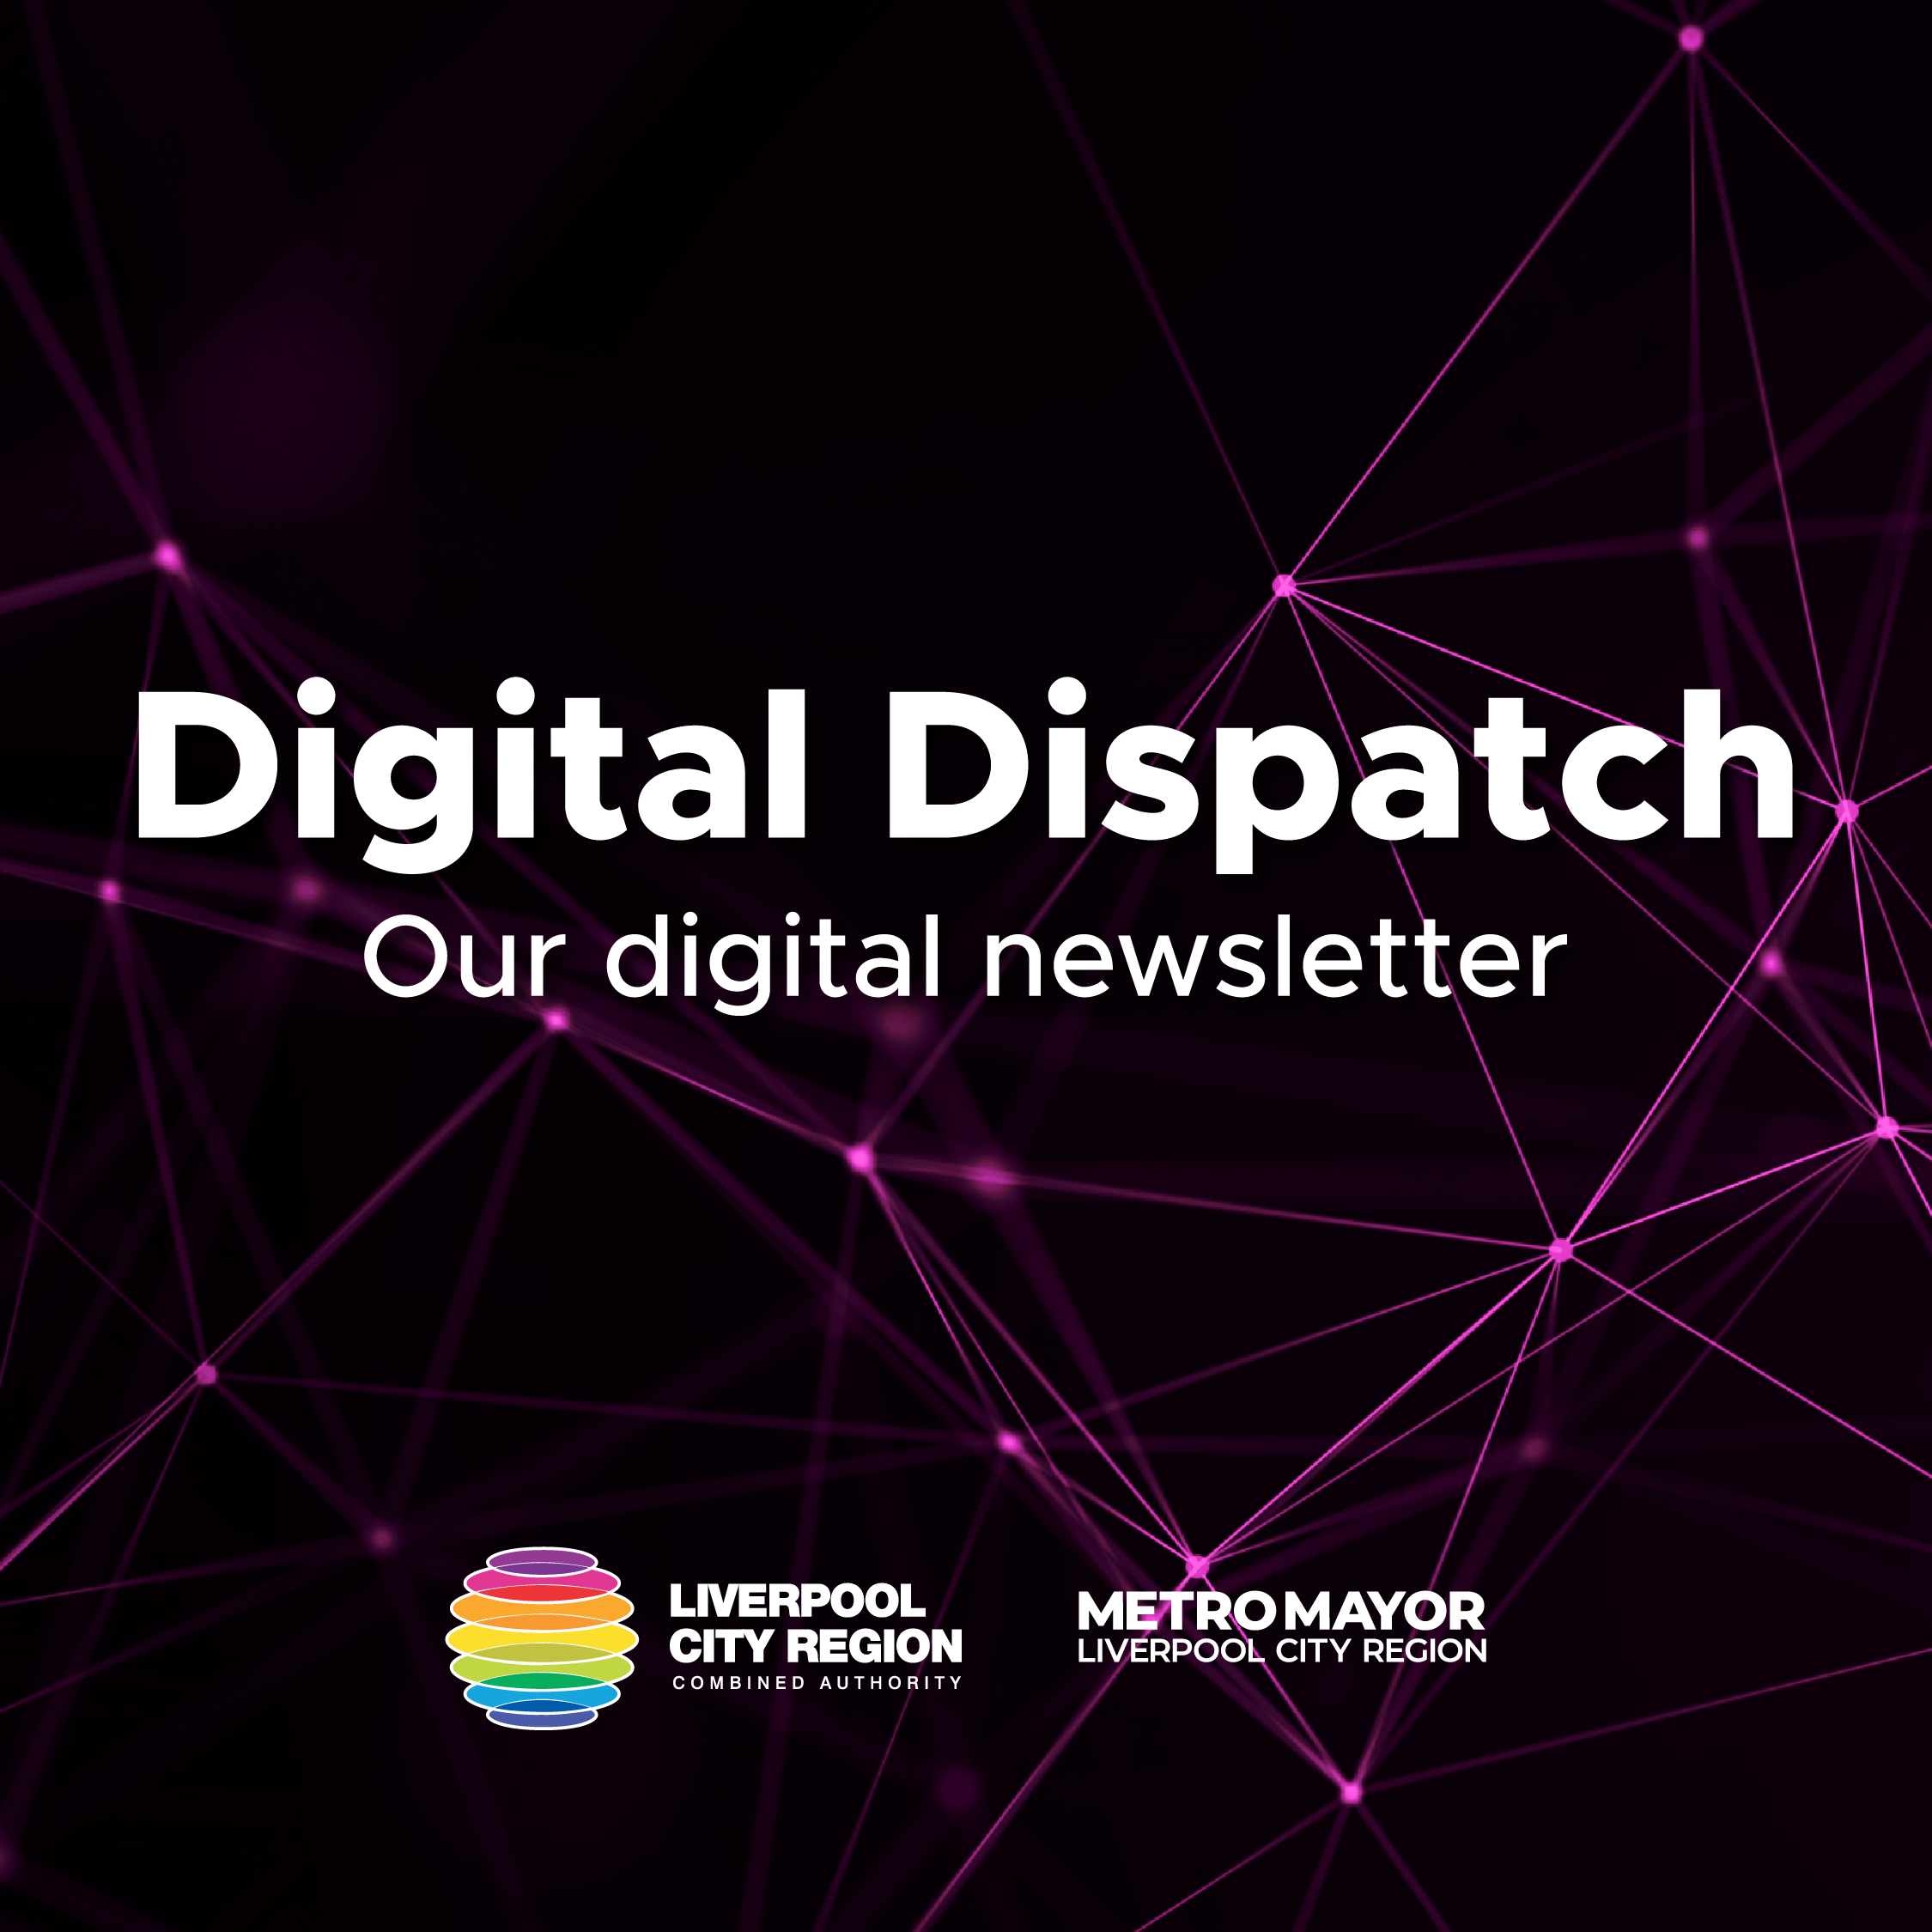 'Digital Dispatch - Our Digital Newsletter' written in white text against a black background. The background is black and has nodes connected to make a network lit up in pink.